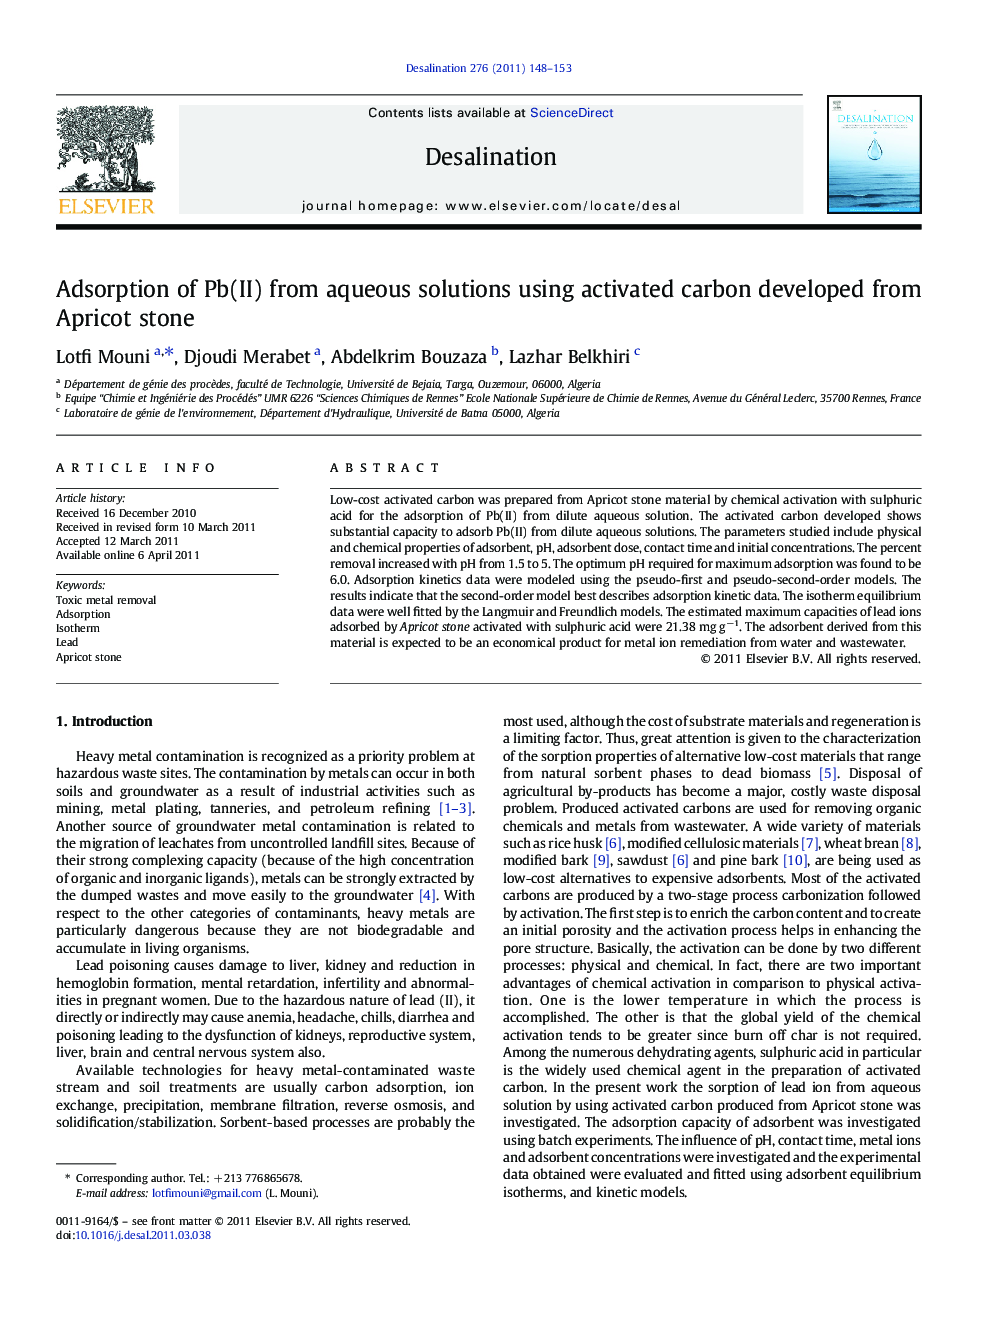 Adsorption of Pb(II) from aqueous solutions using activated carbon developed from Apricot stone